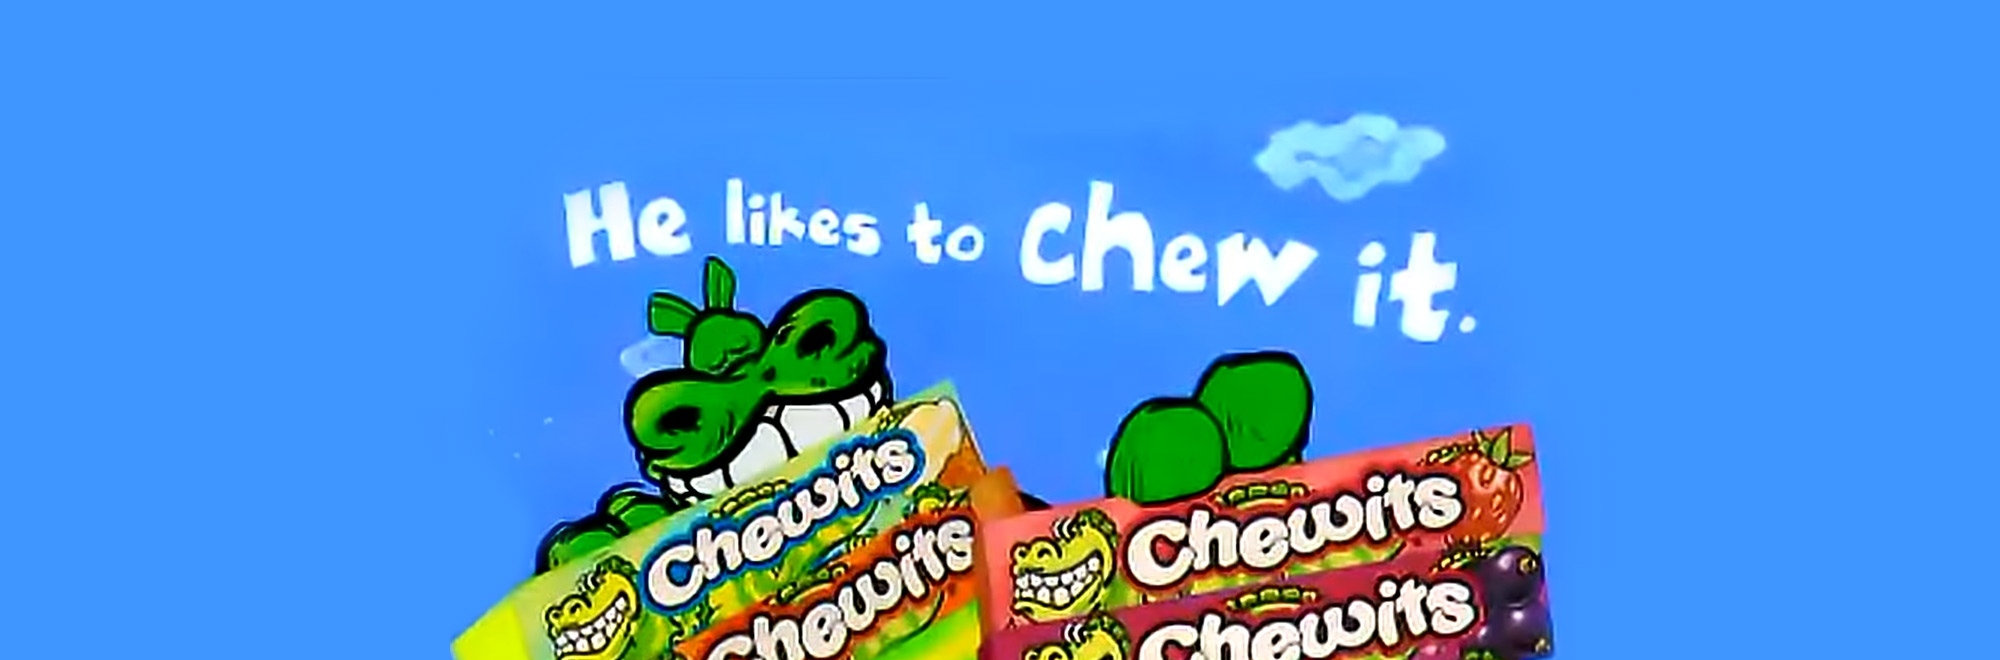 “I like to Chewit Chewit:” A childhood classic